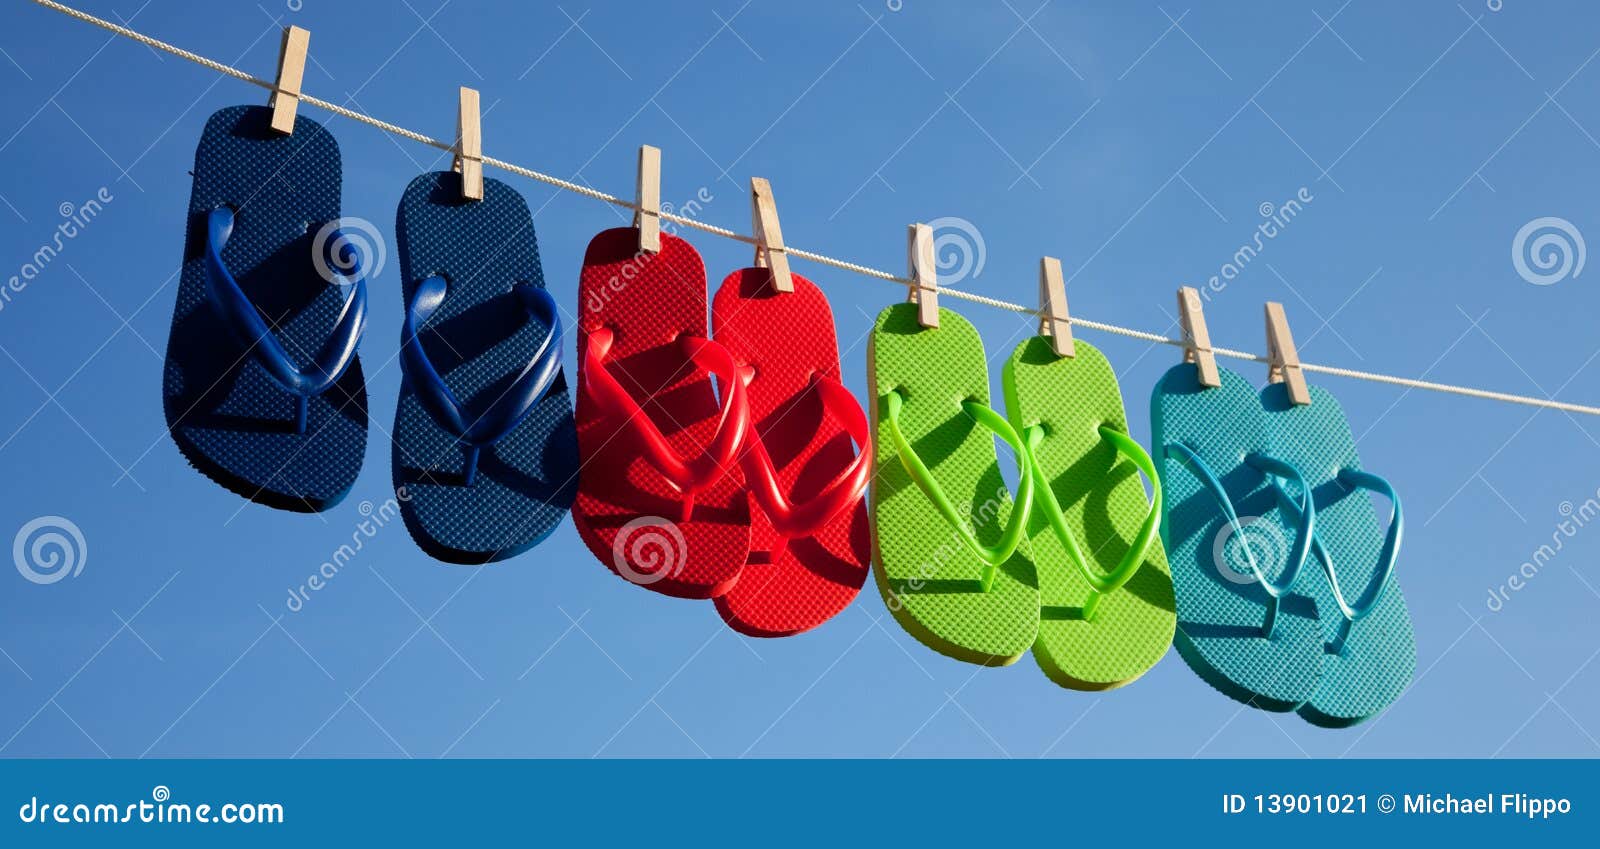 Row of Flipflops Against a Blue Sky Stock Image - Image of flop